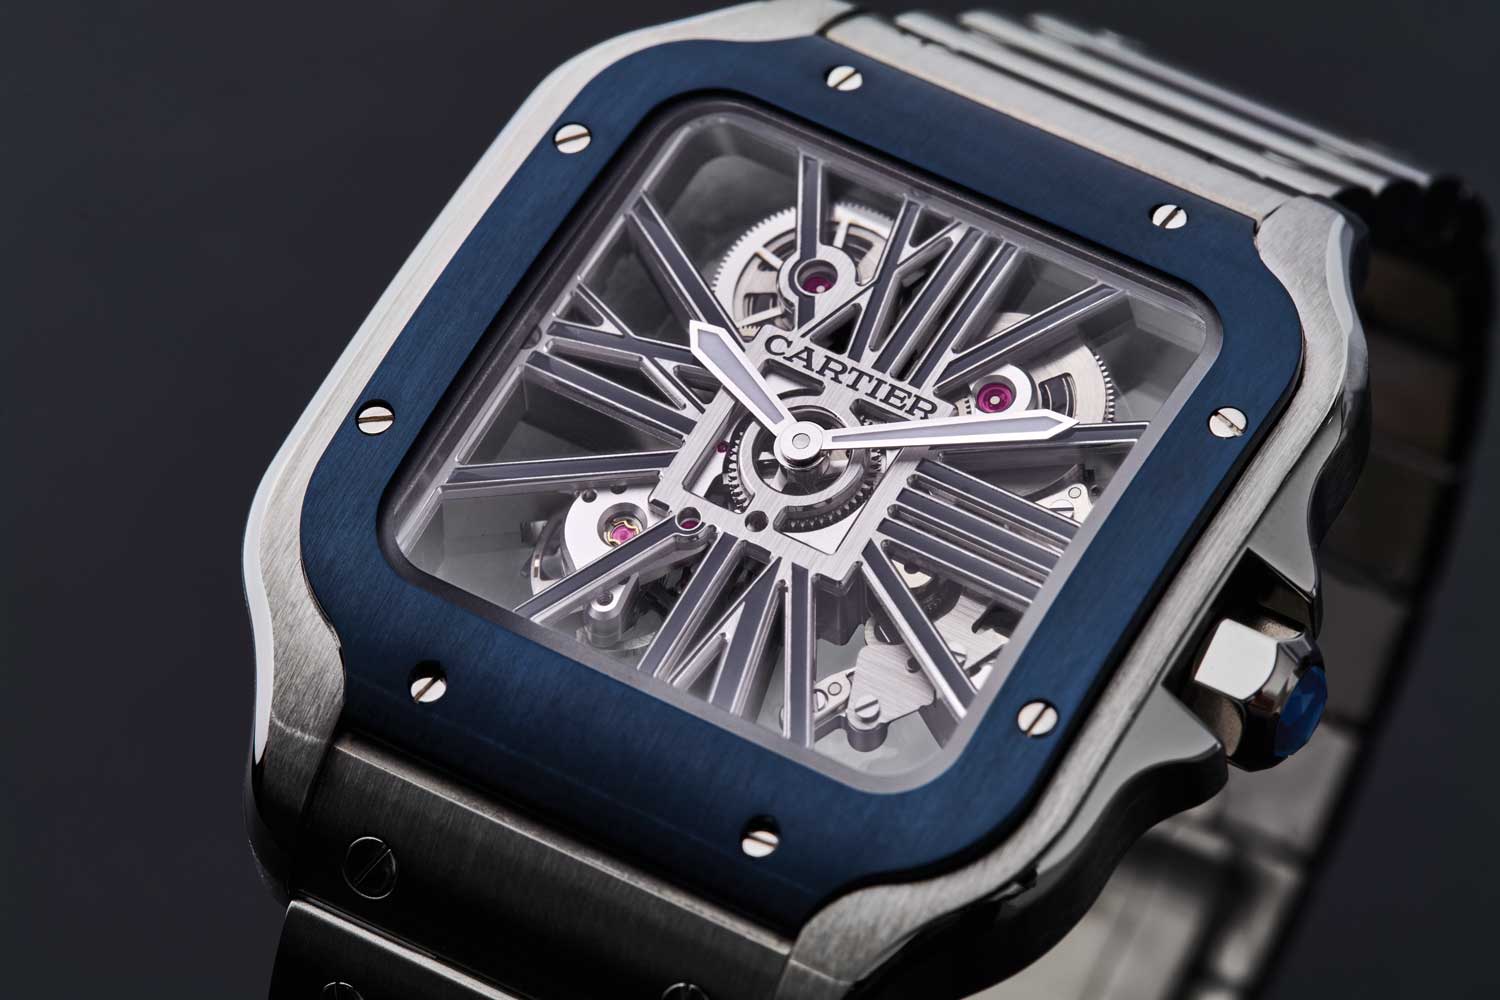 It isn’t just the skeleton caliber, it’s the refined case ergonomics that makes this Santos sing